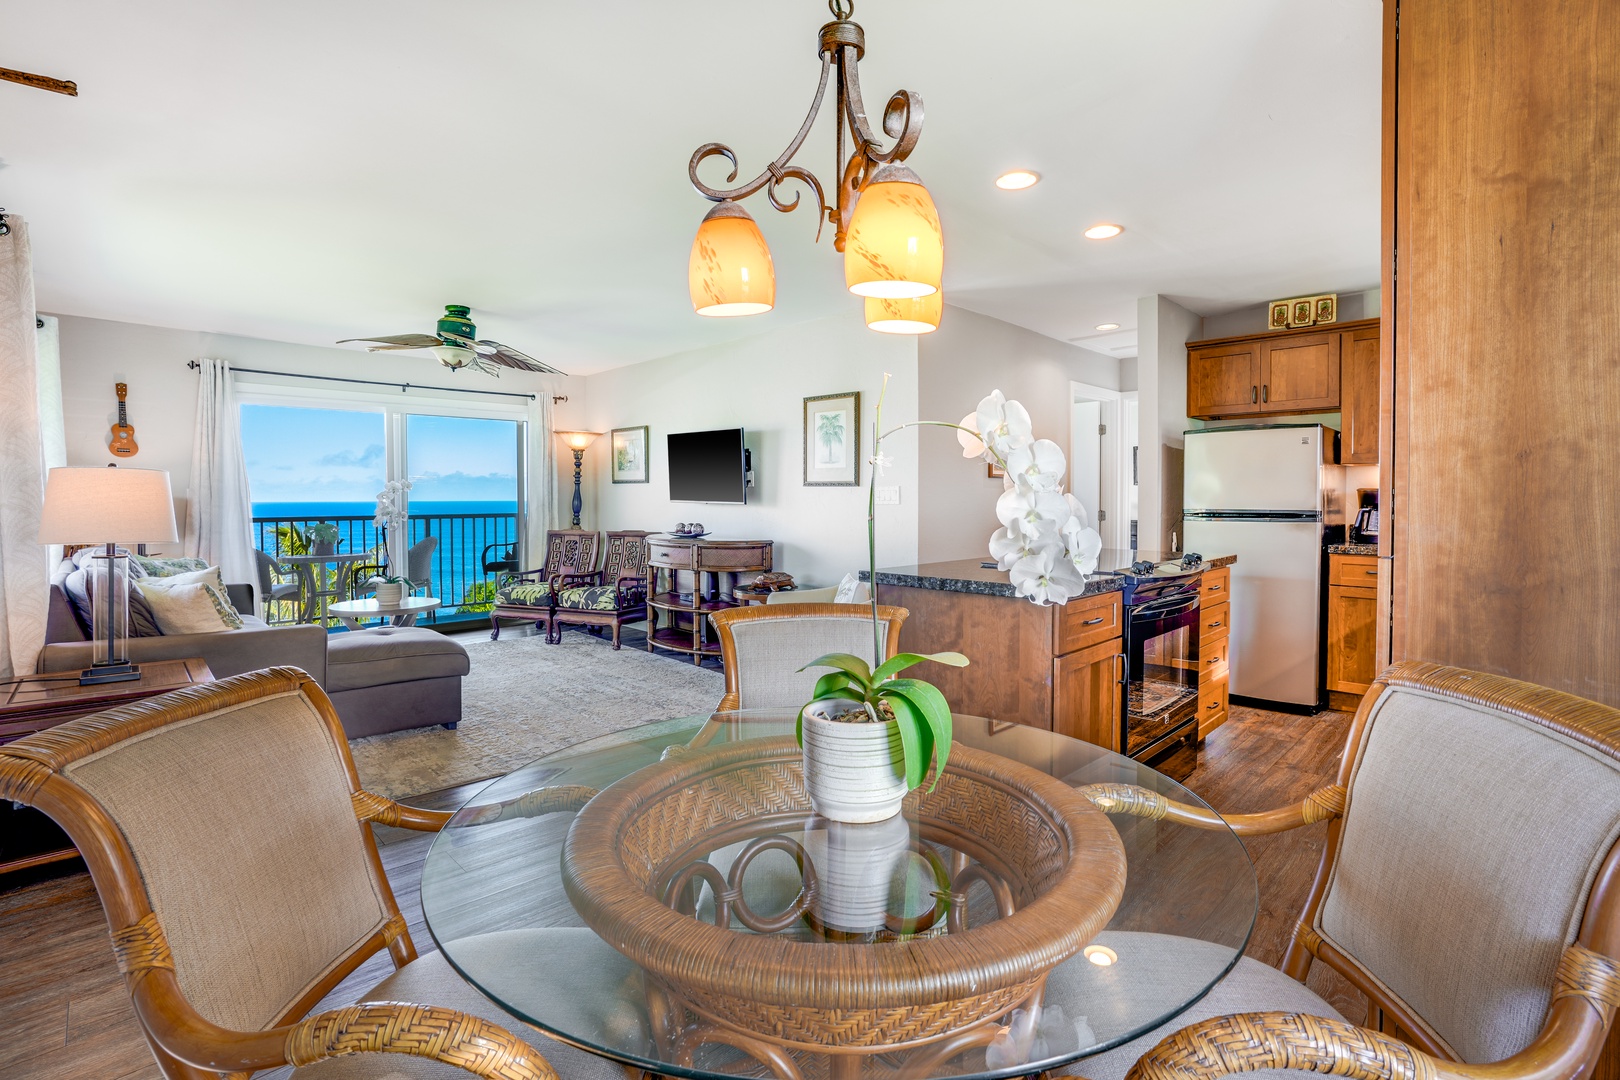 Princeville Vacation Rentals, Alii Kai 7201 - The open-plan living space invites you to relax in a setting that feels both spacious and intimate.